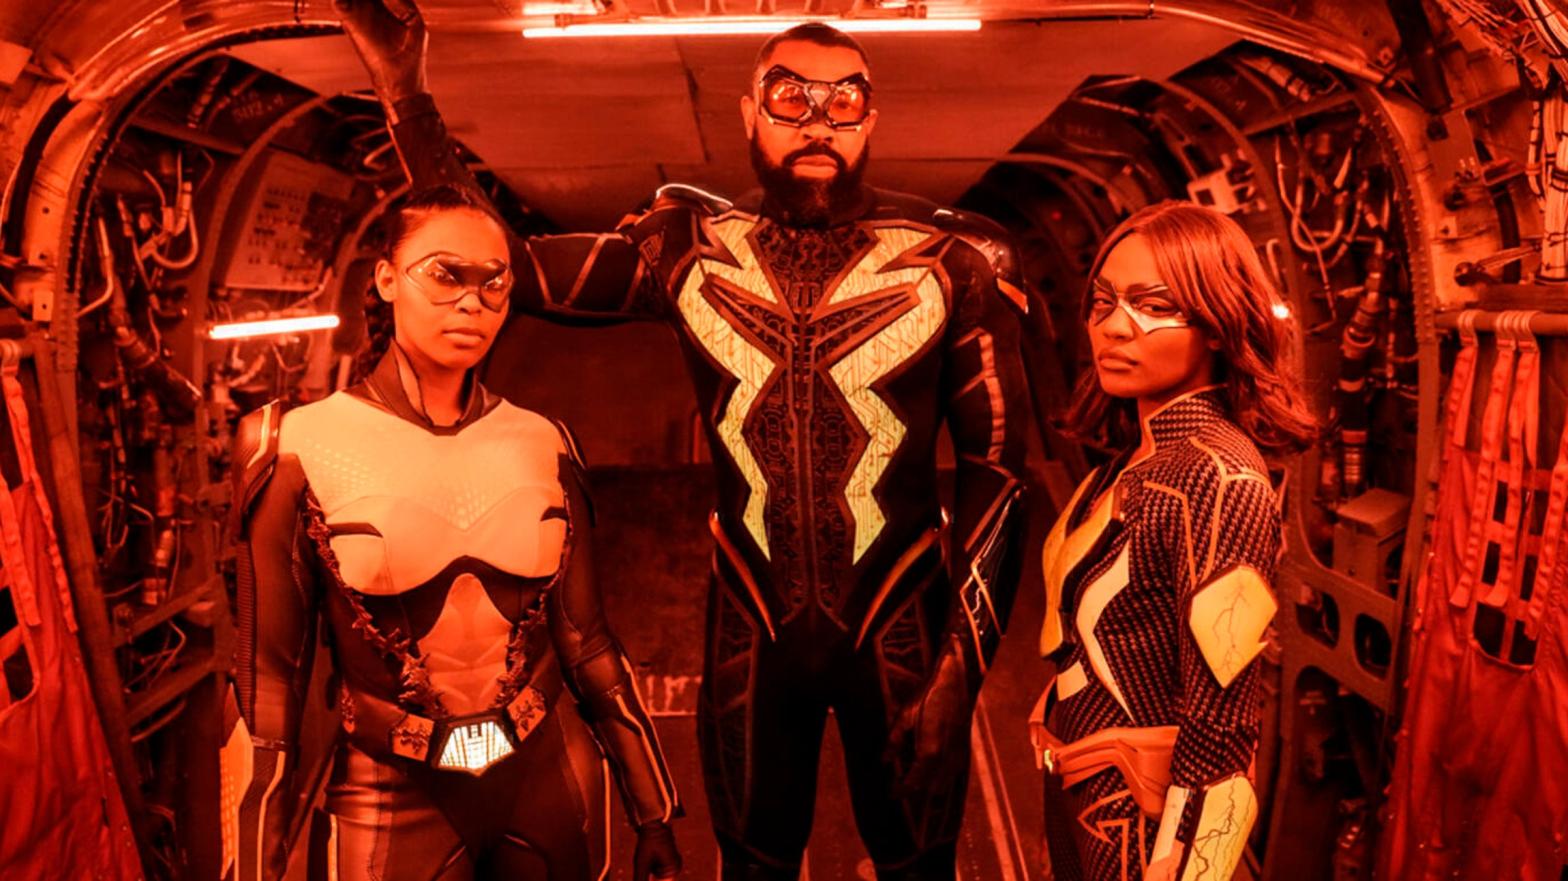 Thunder, Black Lightning, and Lightning suited up for action (Photo: The CW)